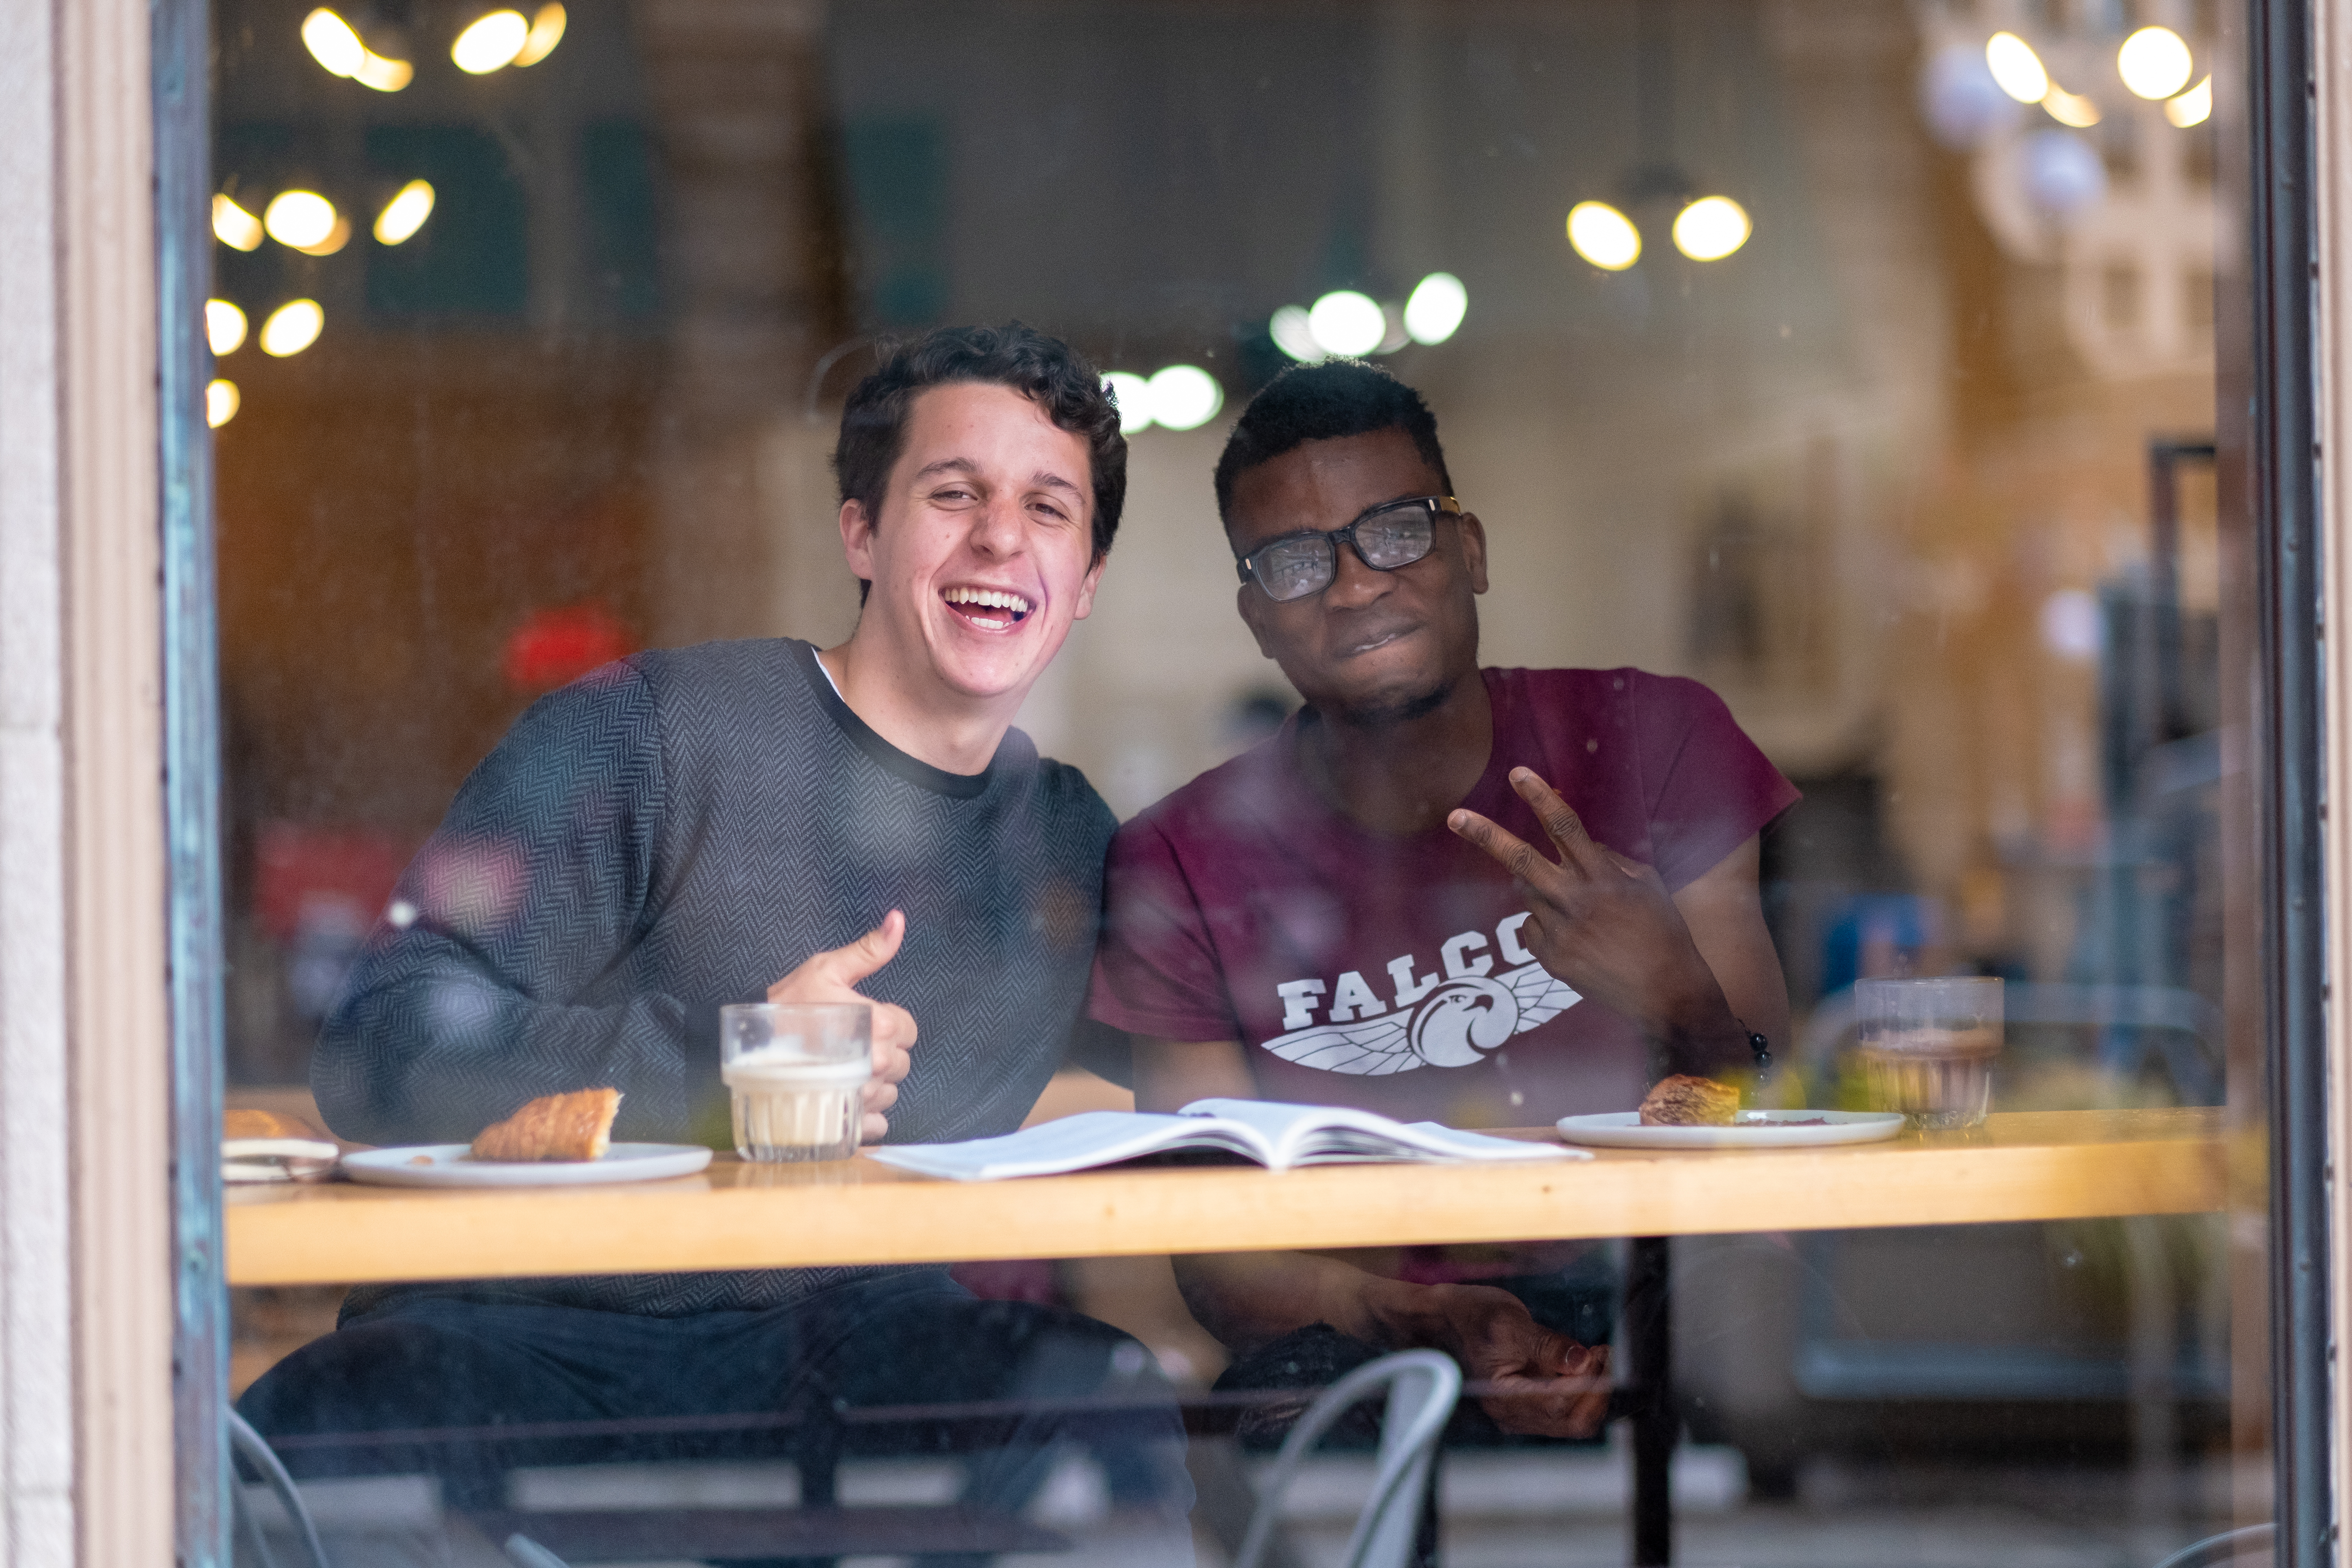 Two students smiling at the camera through a glass window.